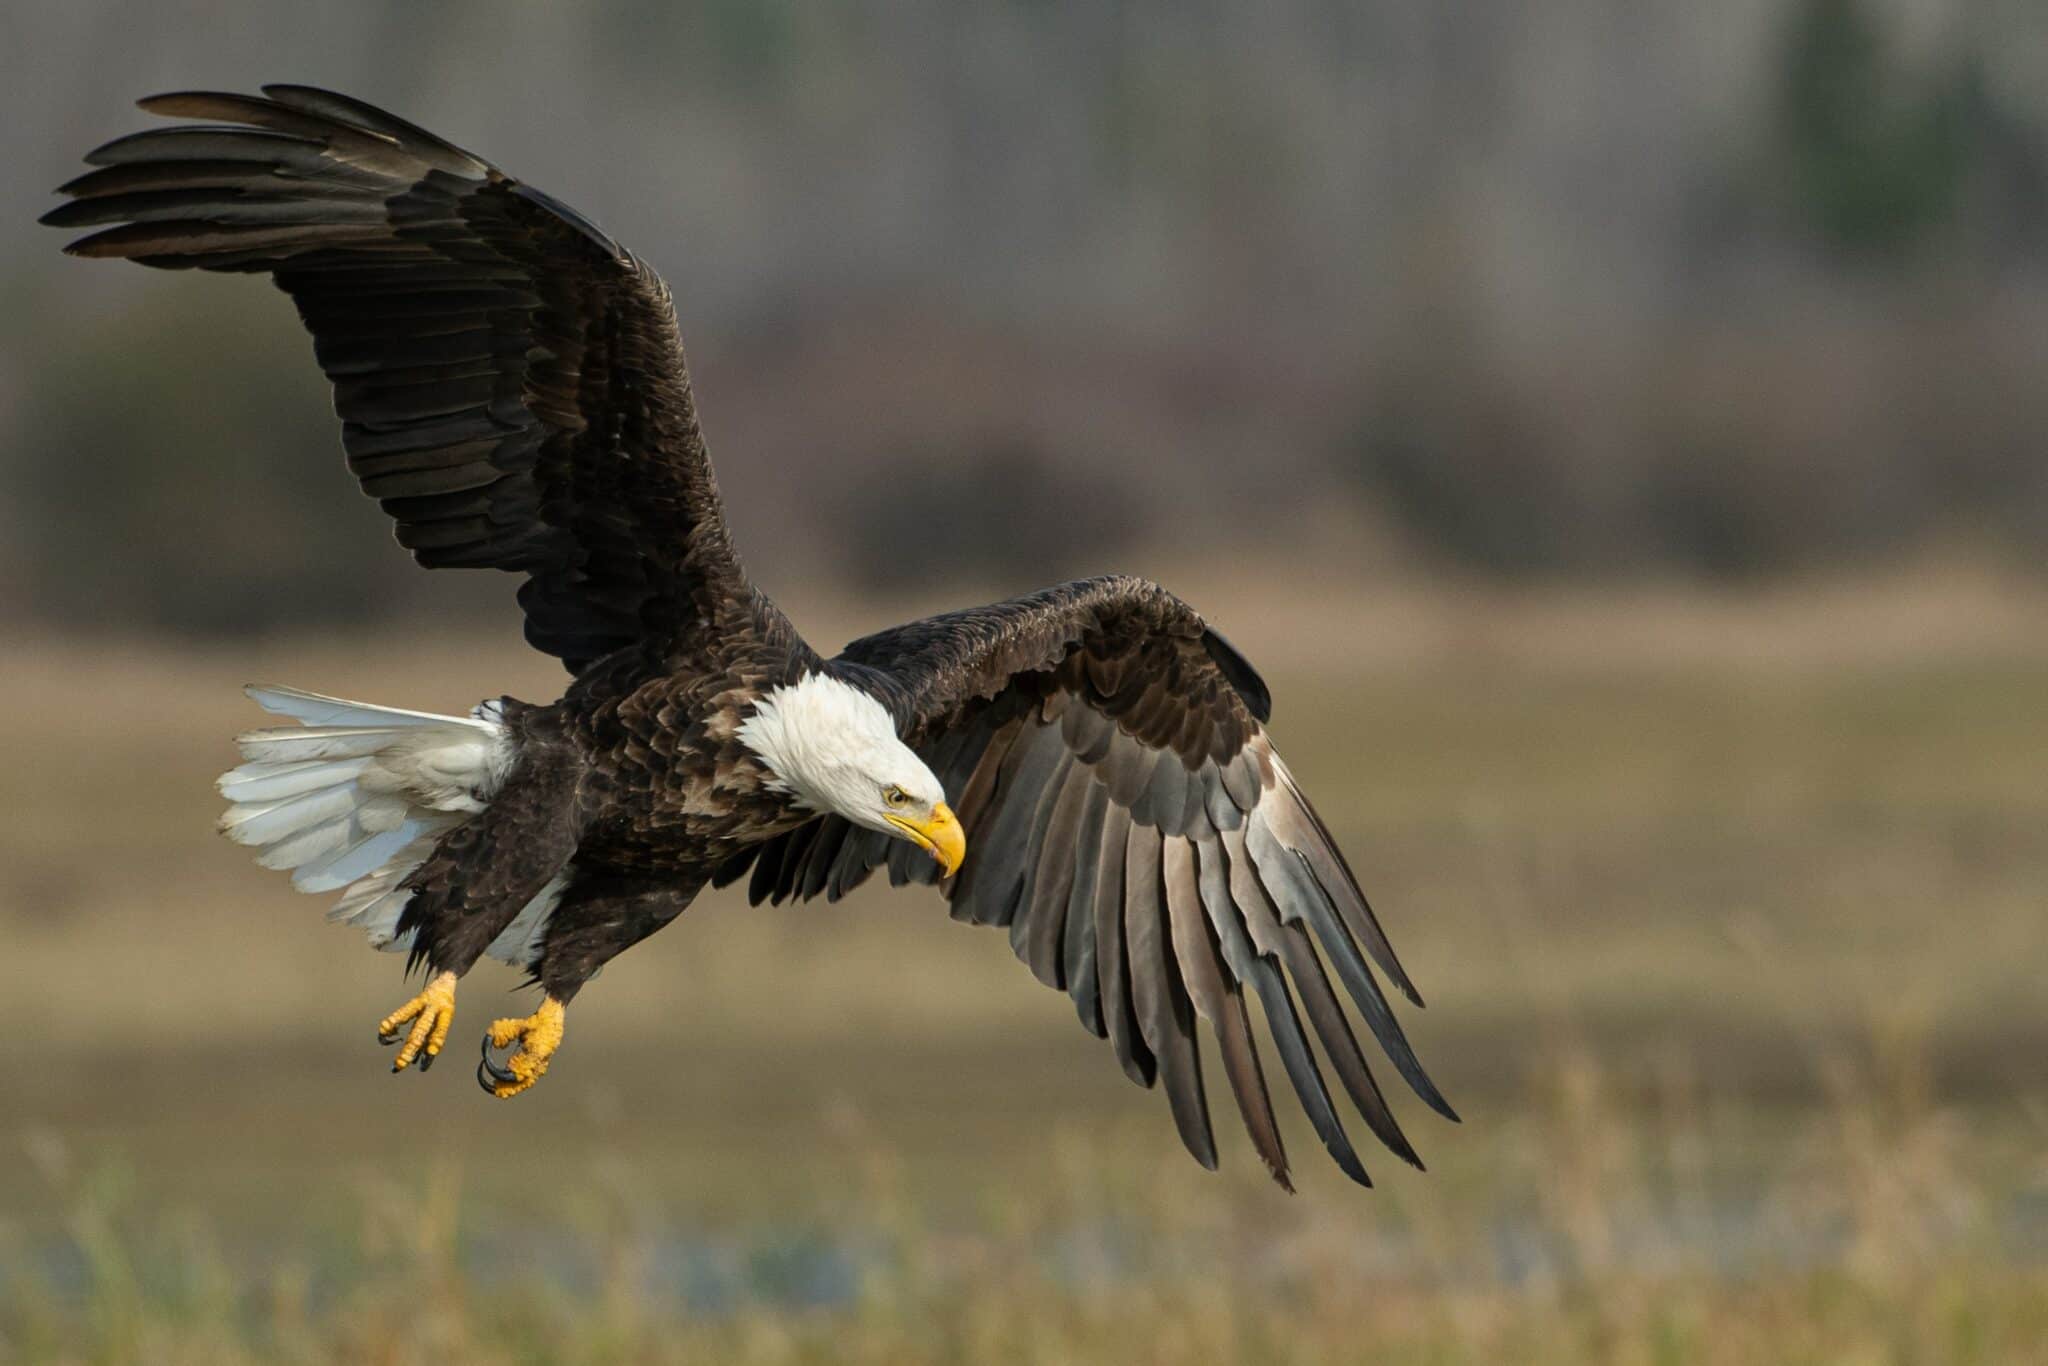 Are Bald Eagles At Risk Of Becoming Endangered?